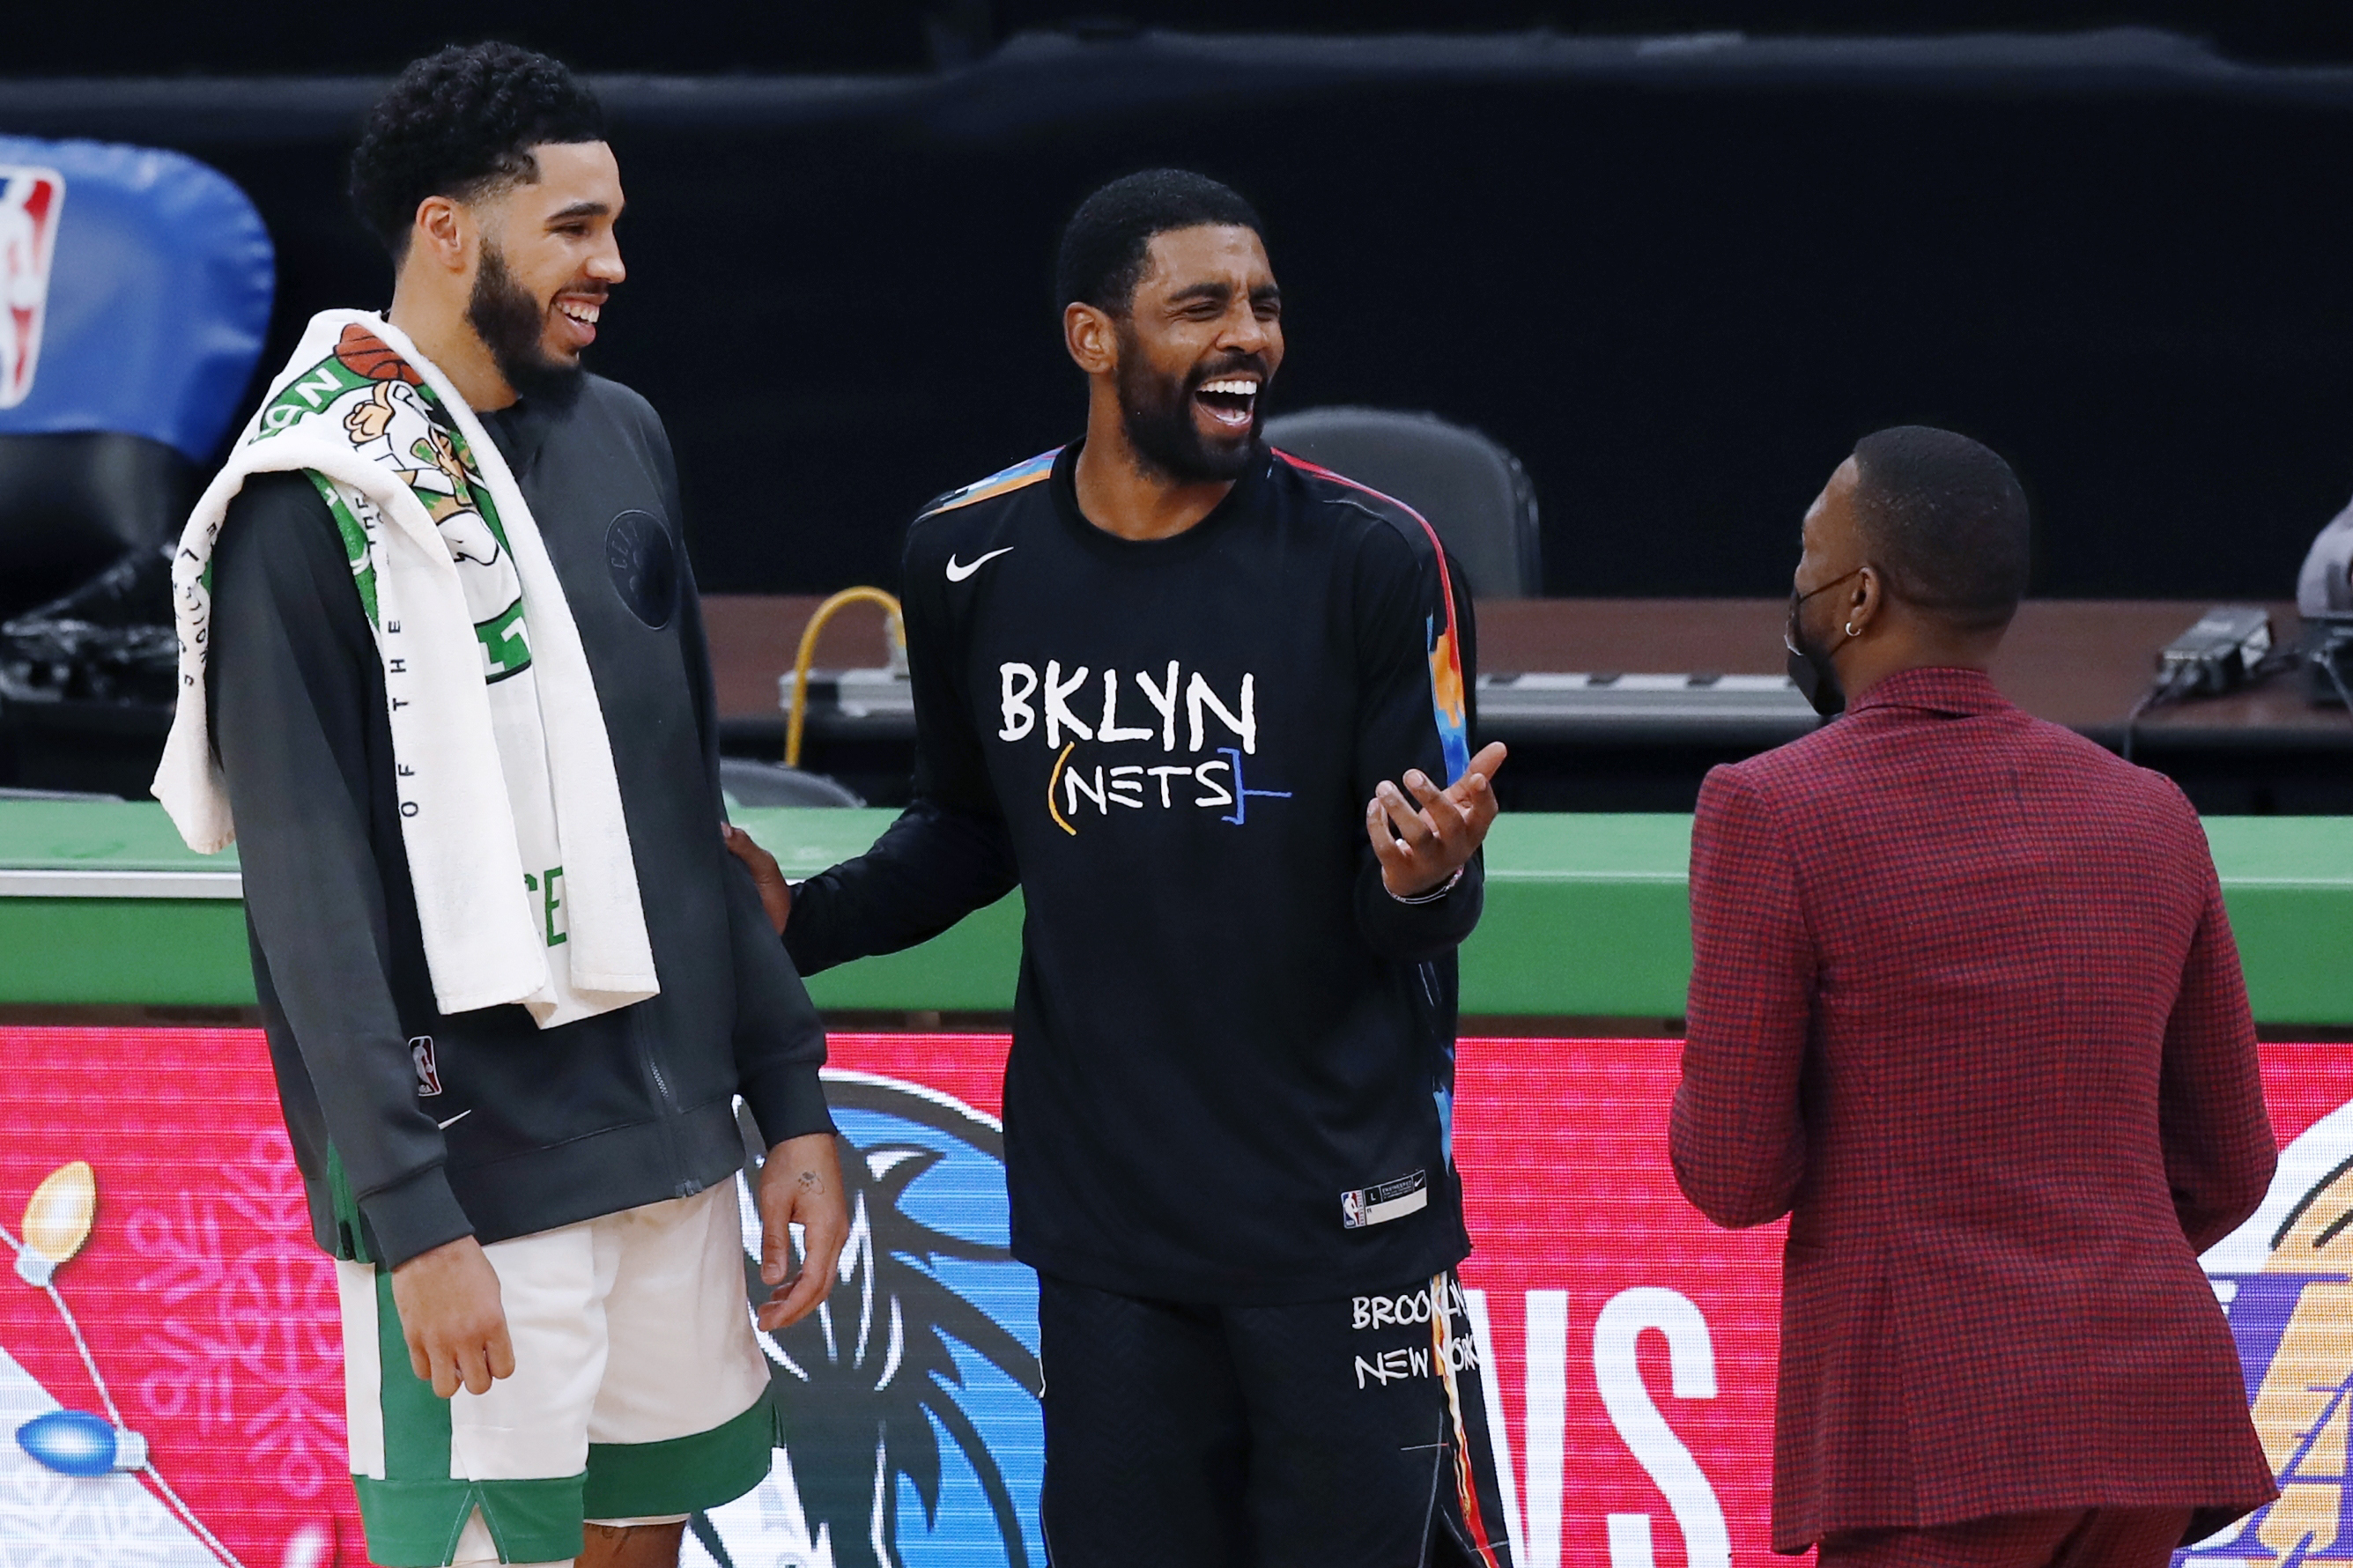 Celtics vs. Nets preview: How the Celtics, Nets match up in first